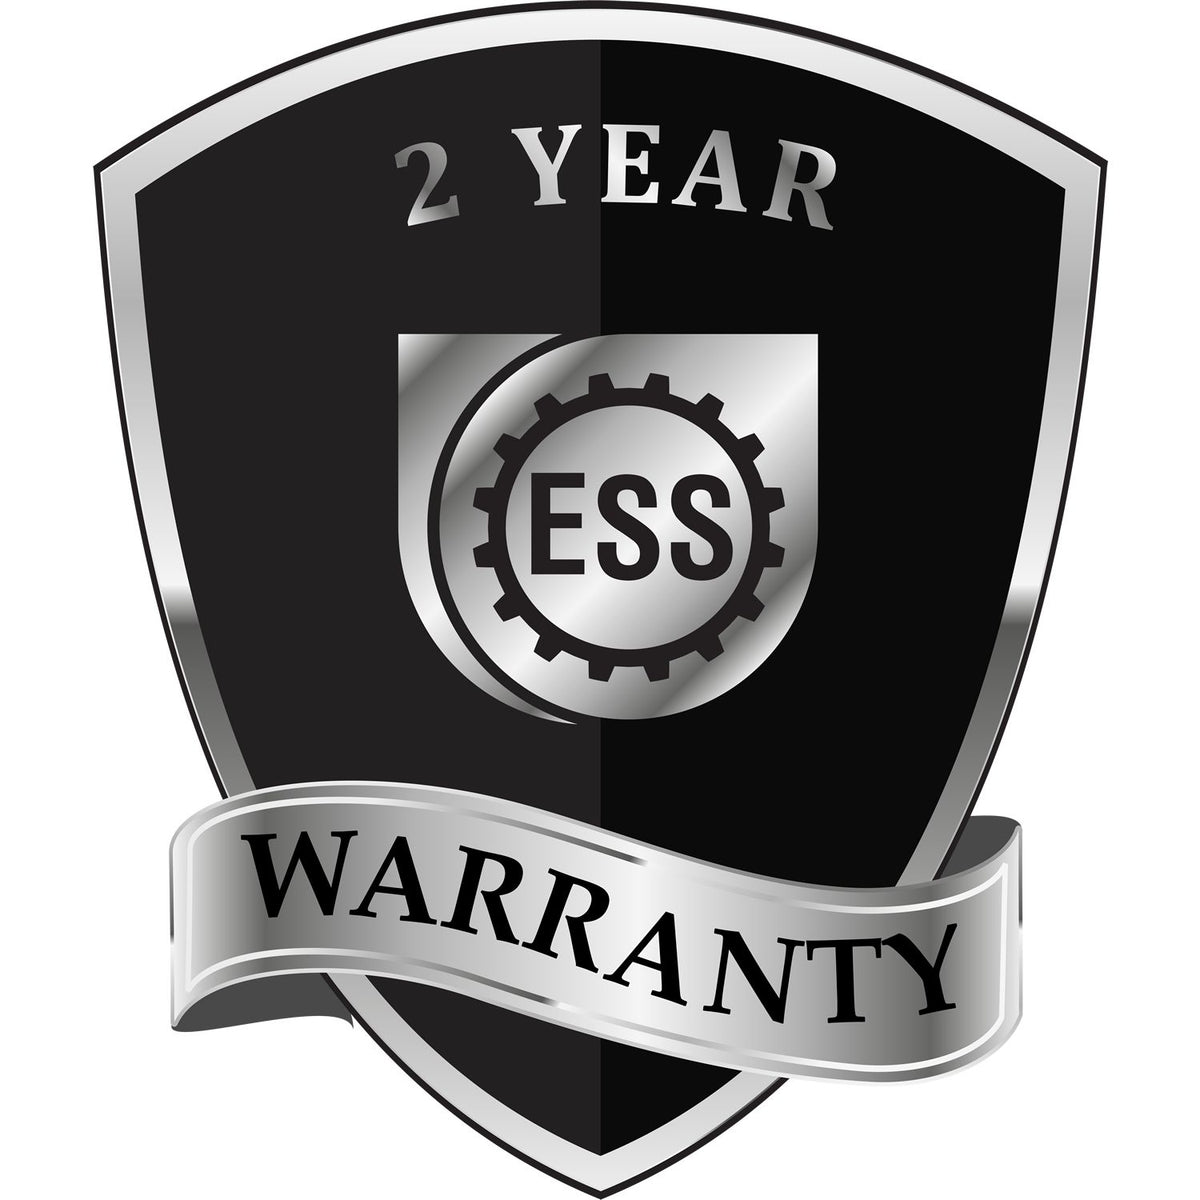 A black and silver badge or emblem showing warranty information for the Hybrid Montana Landscape Architect Seal